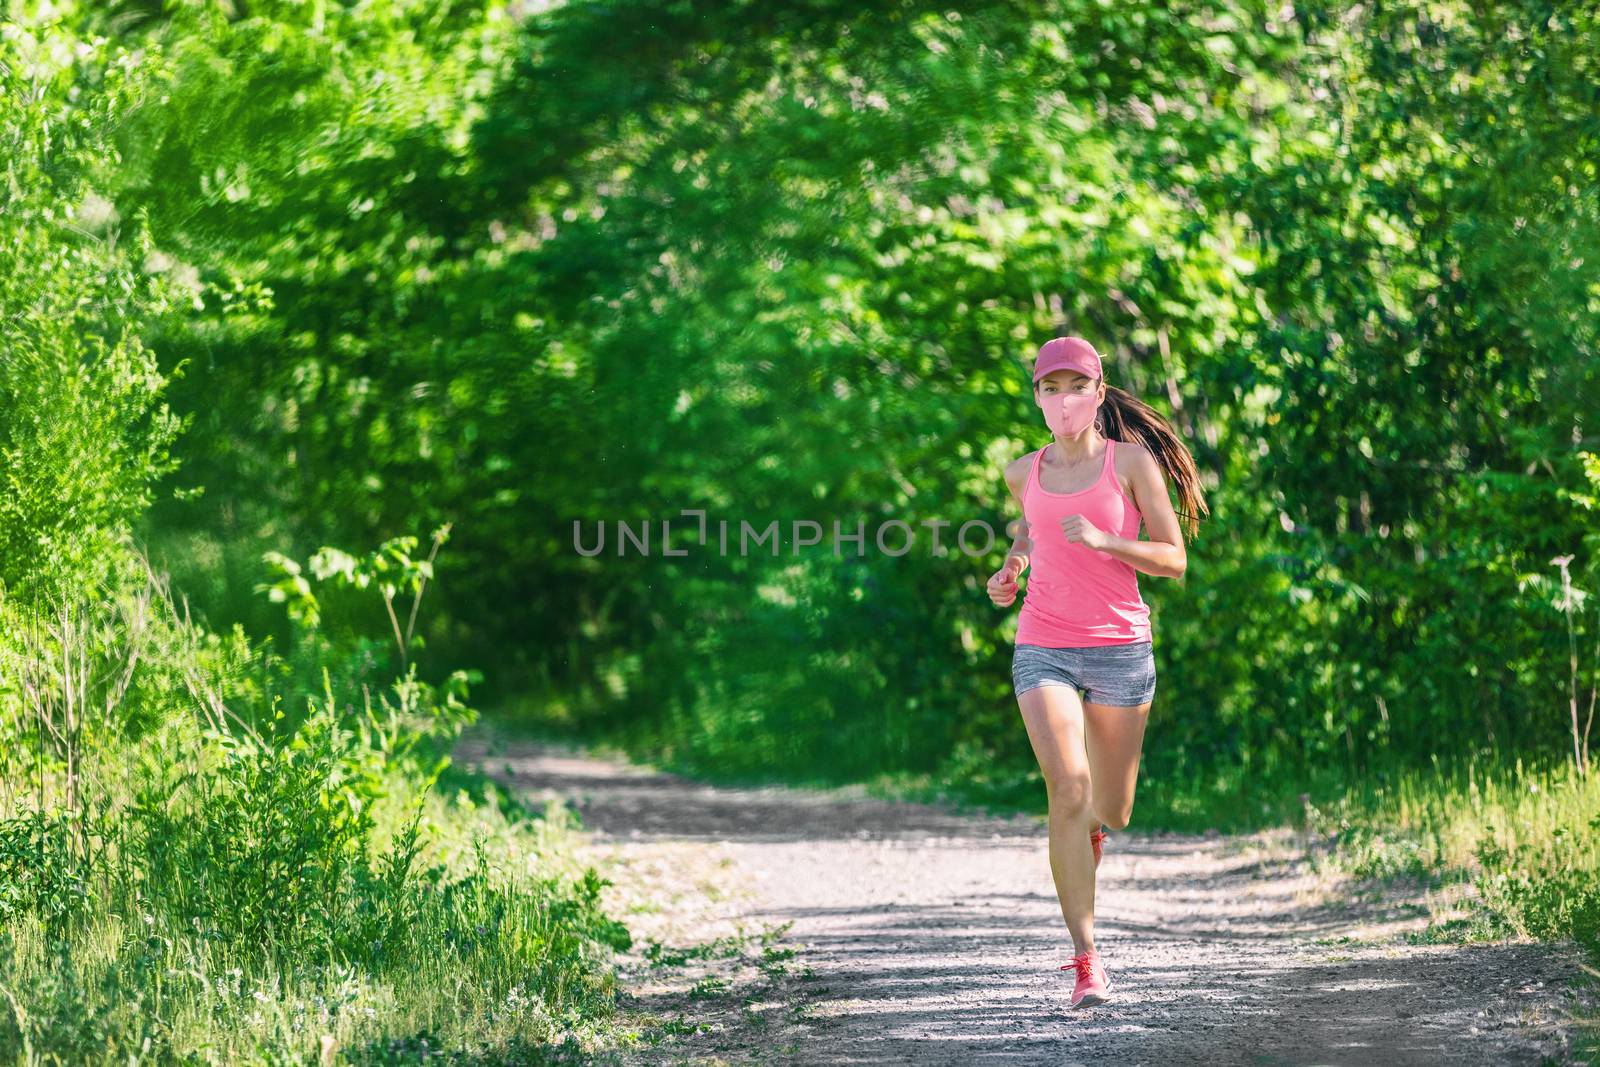 Mask corona virus COVID-19 running runner athlete wearing mask jogging outside on run workout in summer park nature. Sport lifestyle asian young woman.